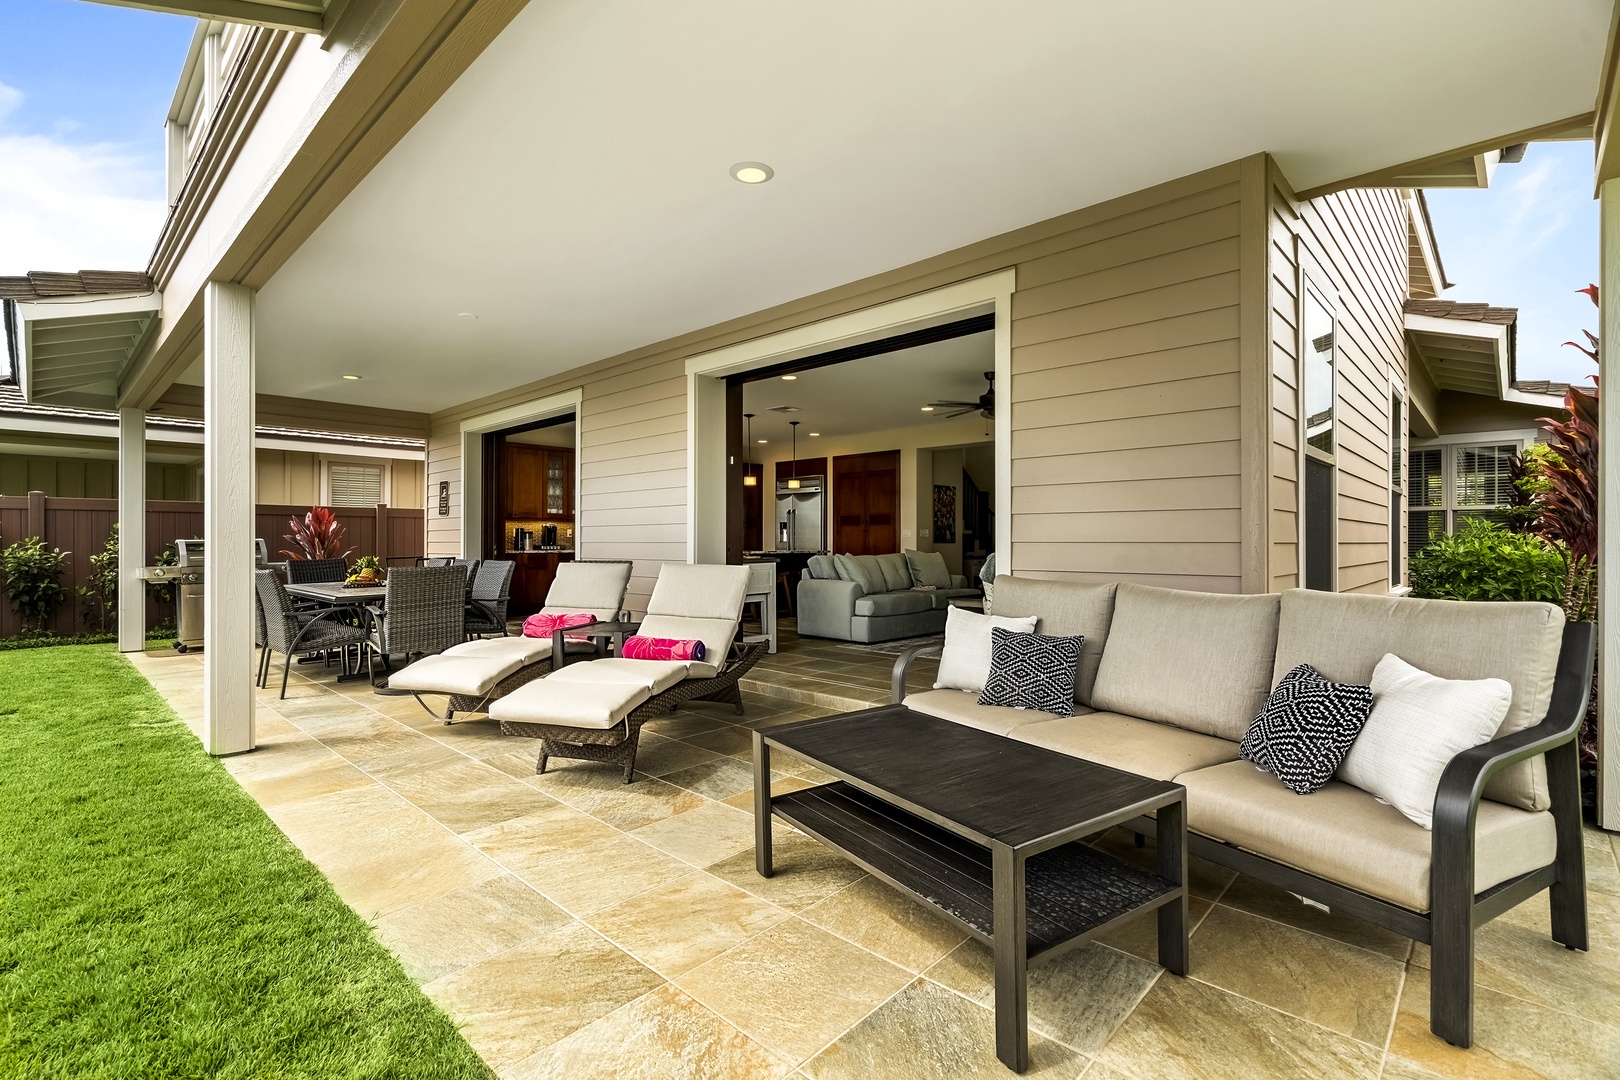 Kailua Kona Vacation Rentals, Golf Green - Outdoor seating options for guests to choose from